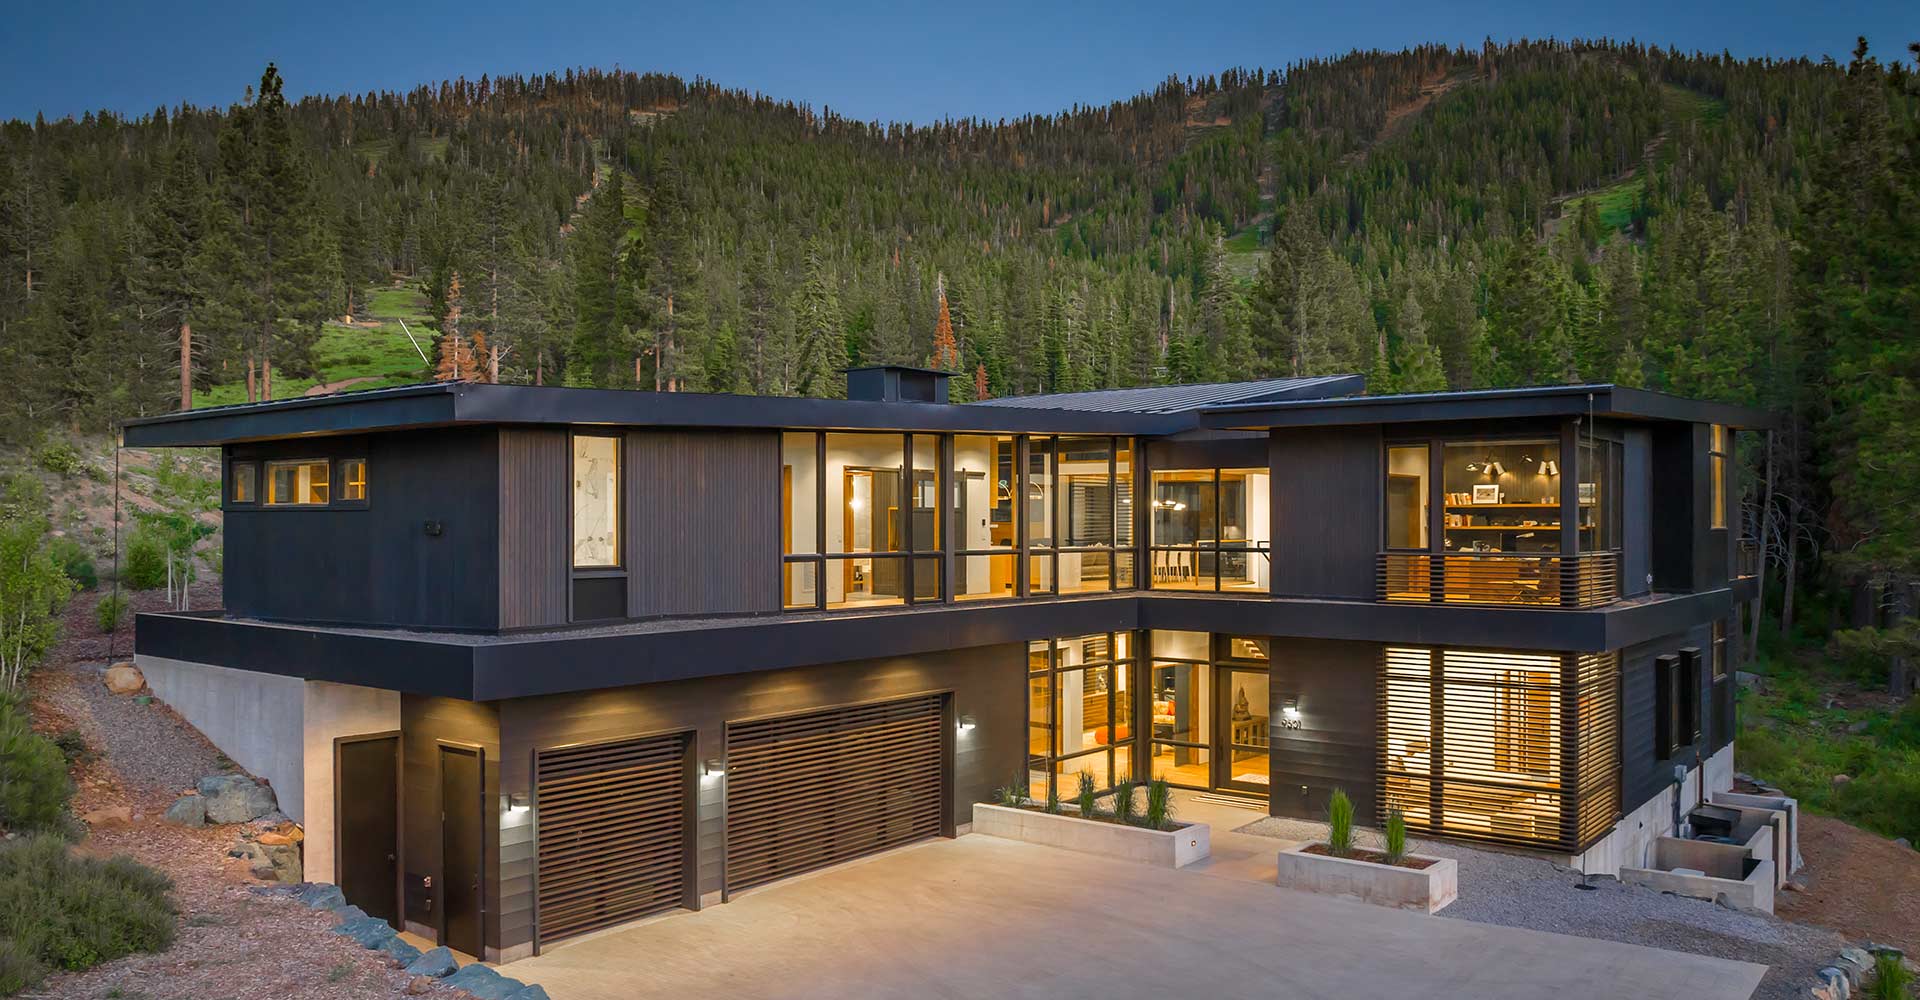 Truckee luxury homes for sale, 9601 Ahwahnee Place, Truckee, CA